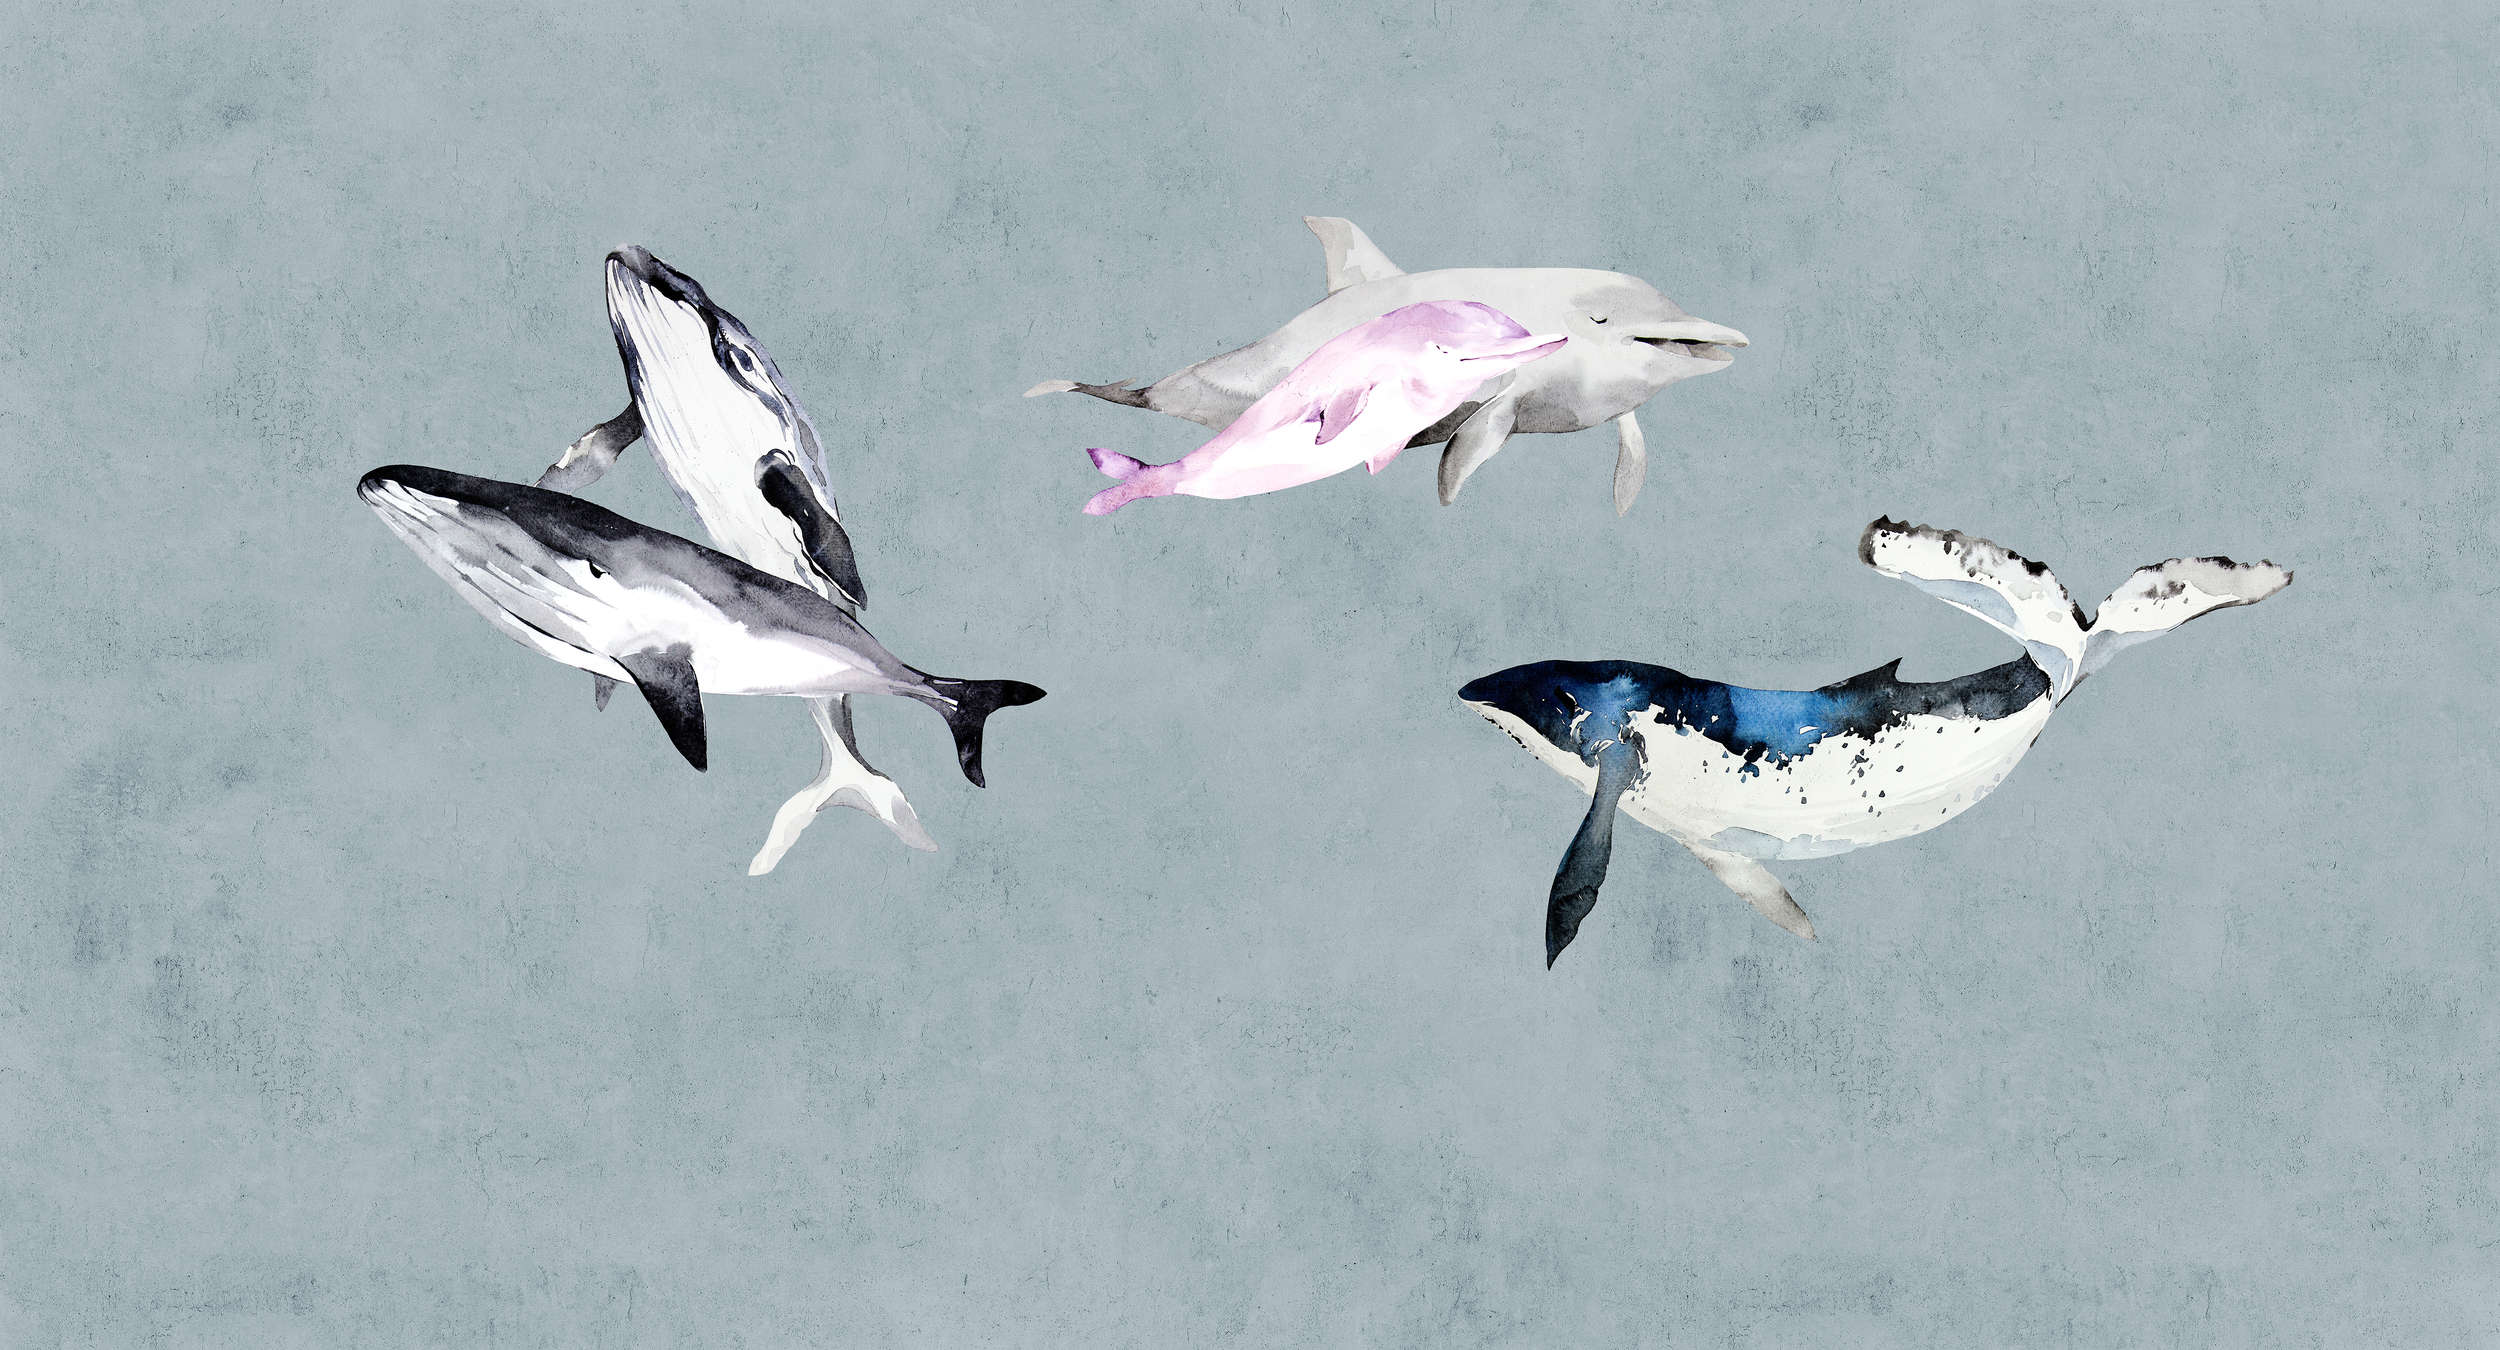             Oceans Five 1 - Watercolour style whales & dolphins mural
        